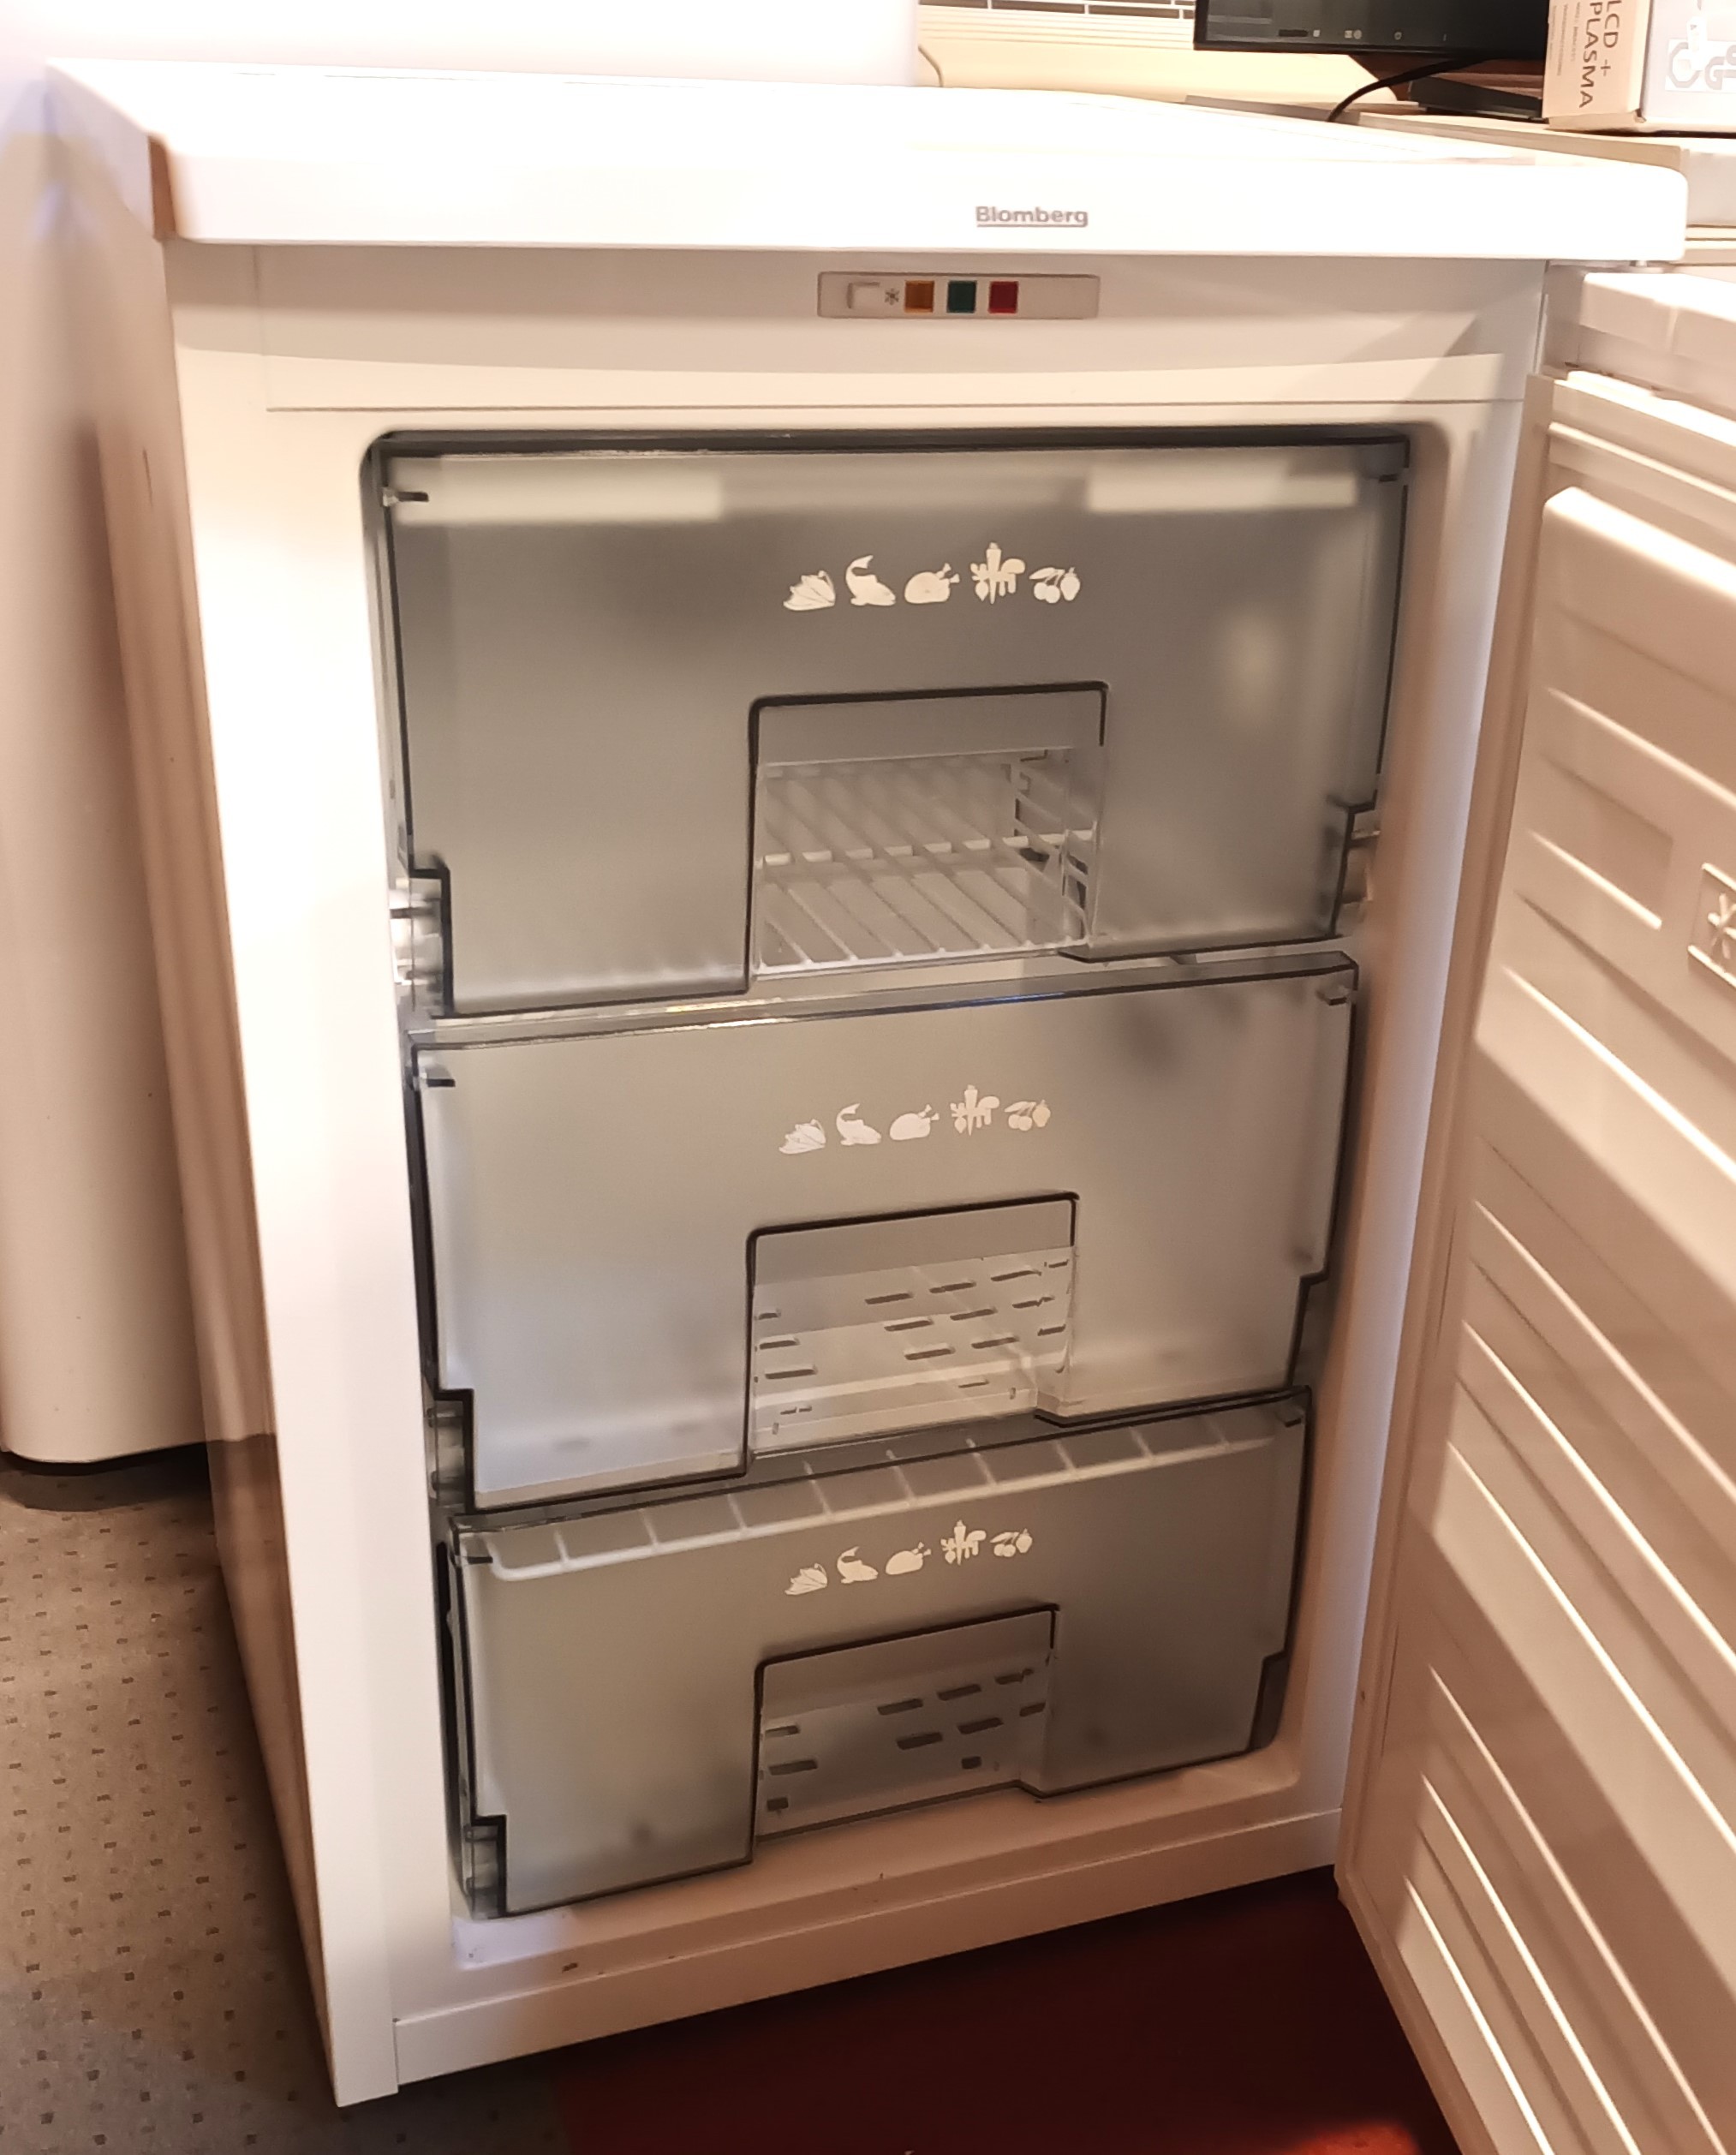 A Bloomberg 3 drawer under counter freezer - 83cm x 54cm. - Image 2 of 2